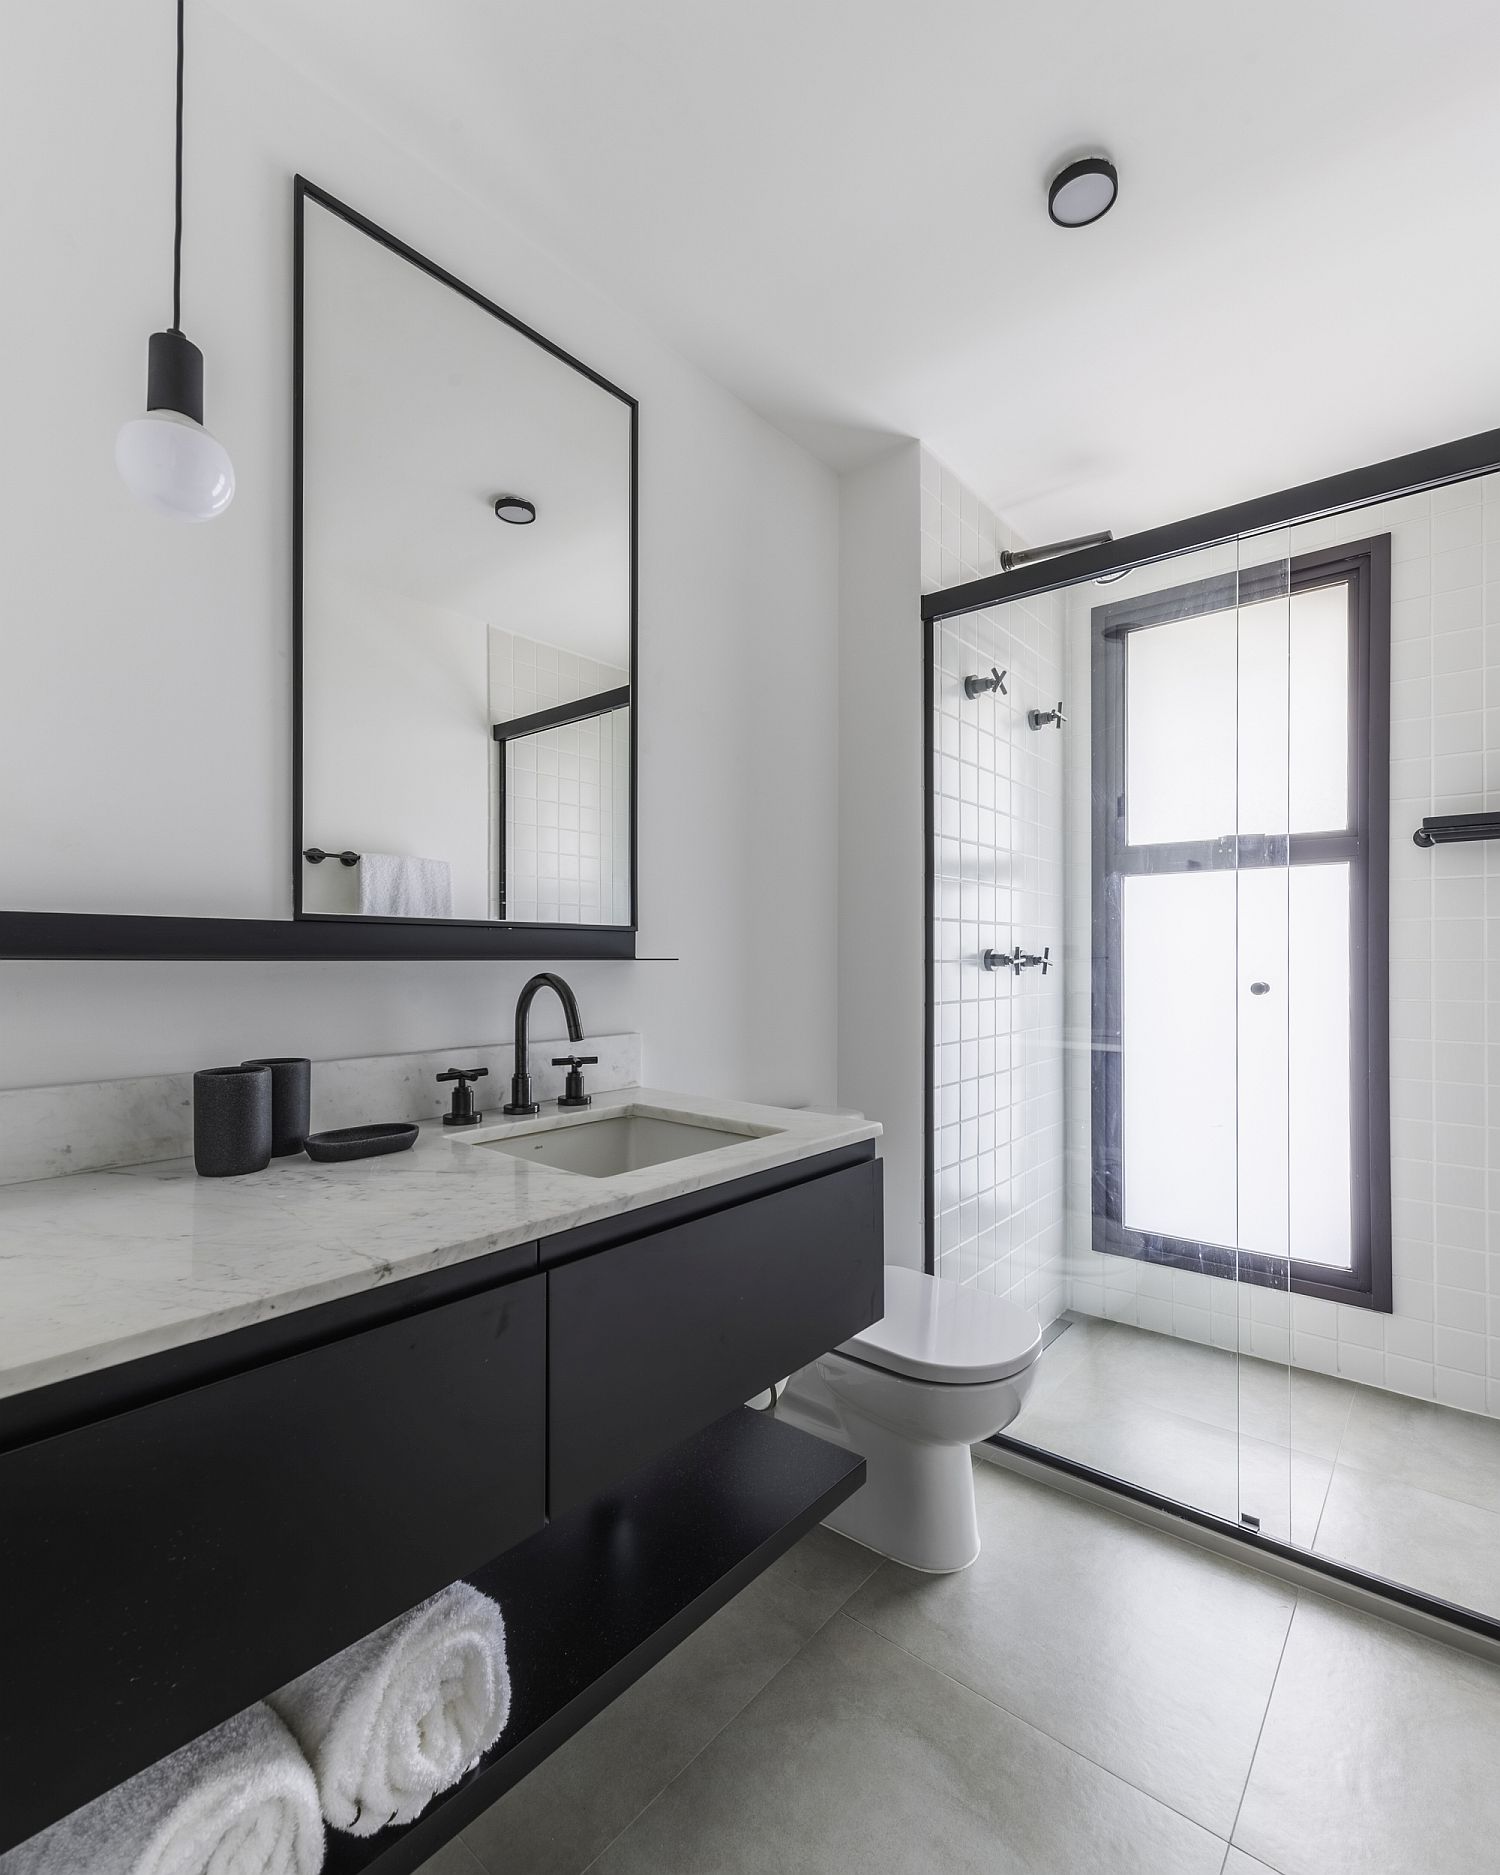 Modern-and-minimal-bathroom-in-black-and-white-with-concrete-finishes-43875